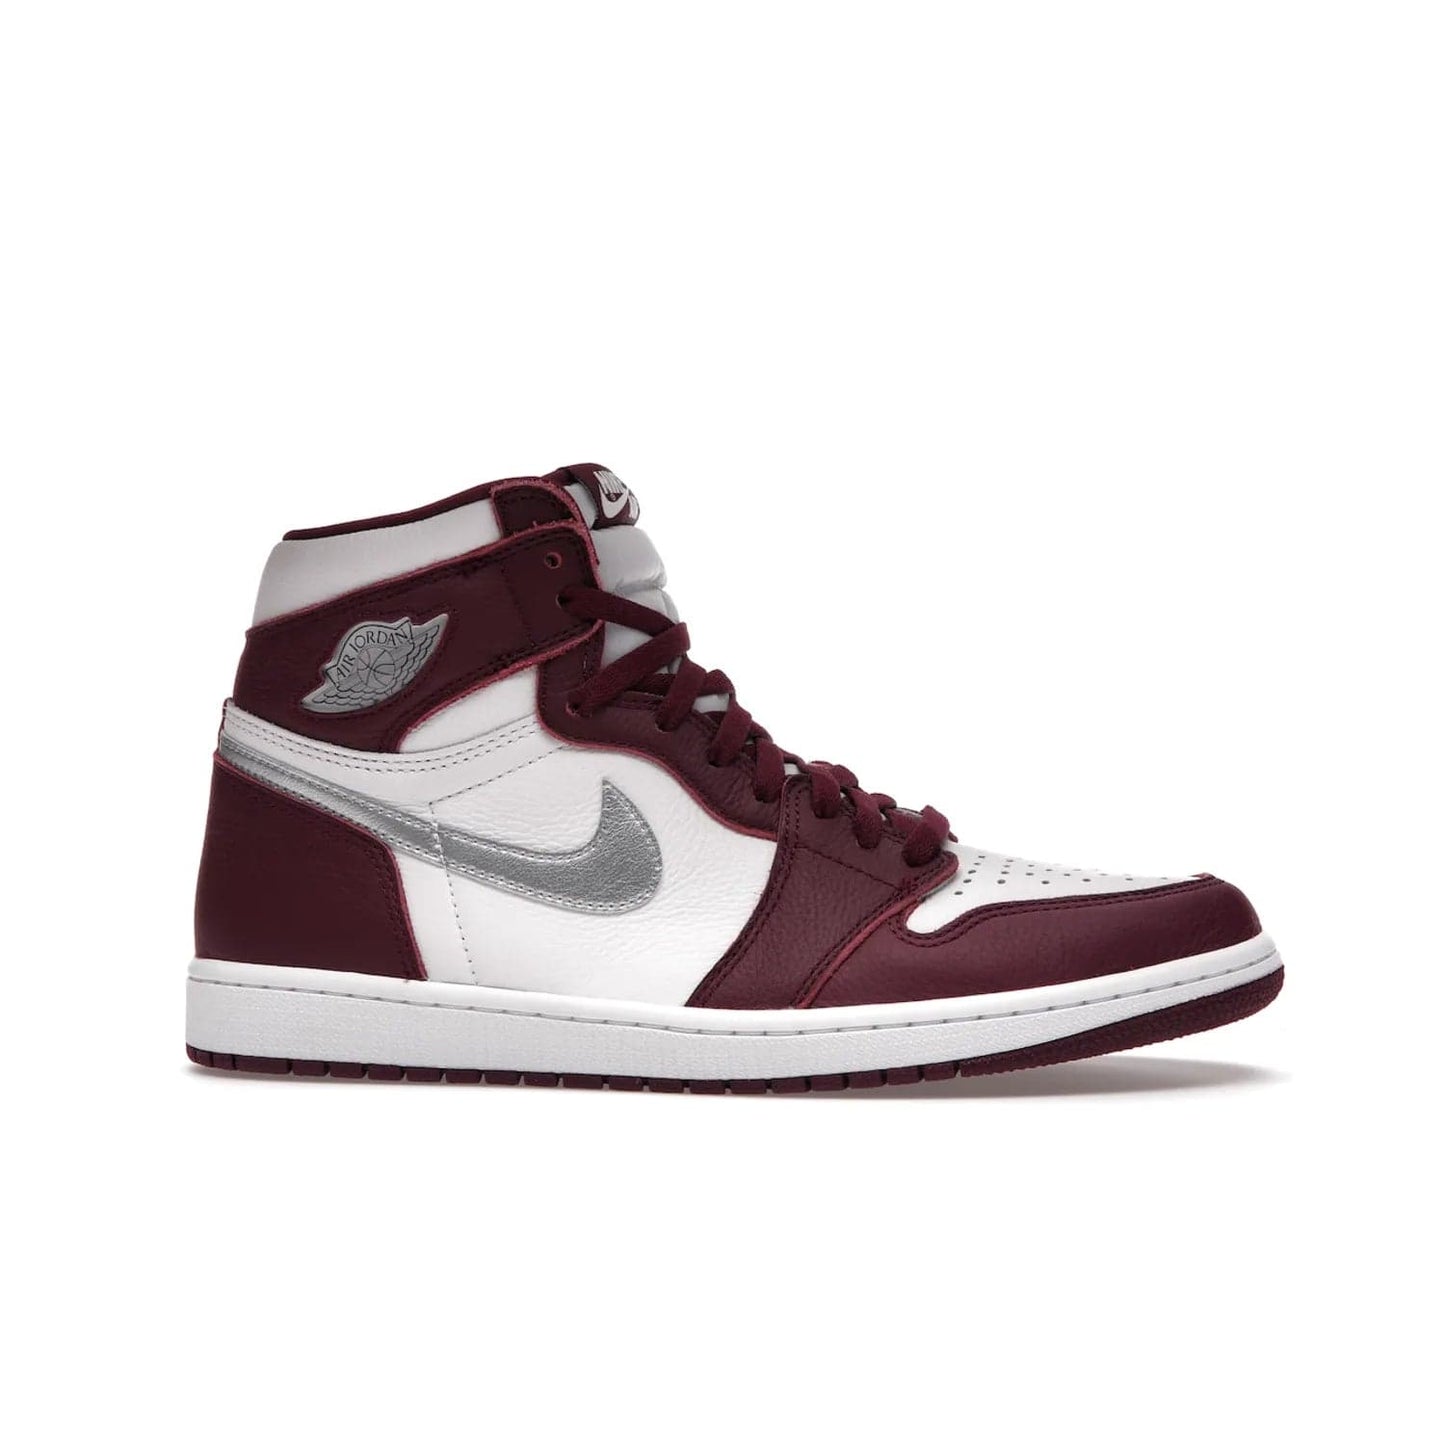 Jordan 1 Retro High OG Bordeaux - Image 2 - Only at www.BallersClubKickz.com - Shop the classic Air Jordan 1 High Bordeaux with a modern high-top cut. The timeless Bordeaux and White-Metallic Silver colorway, releasing Nov 20, 2021, is perfect for practice or a night out.